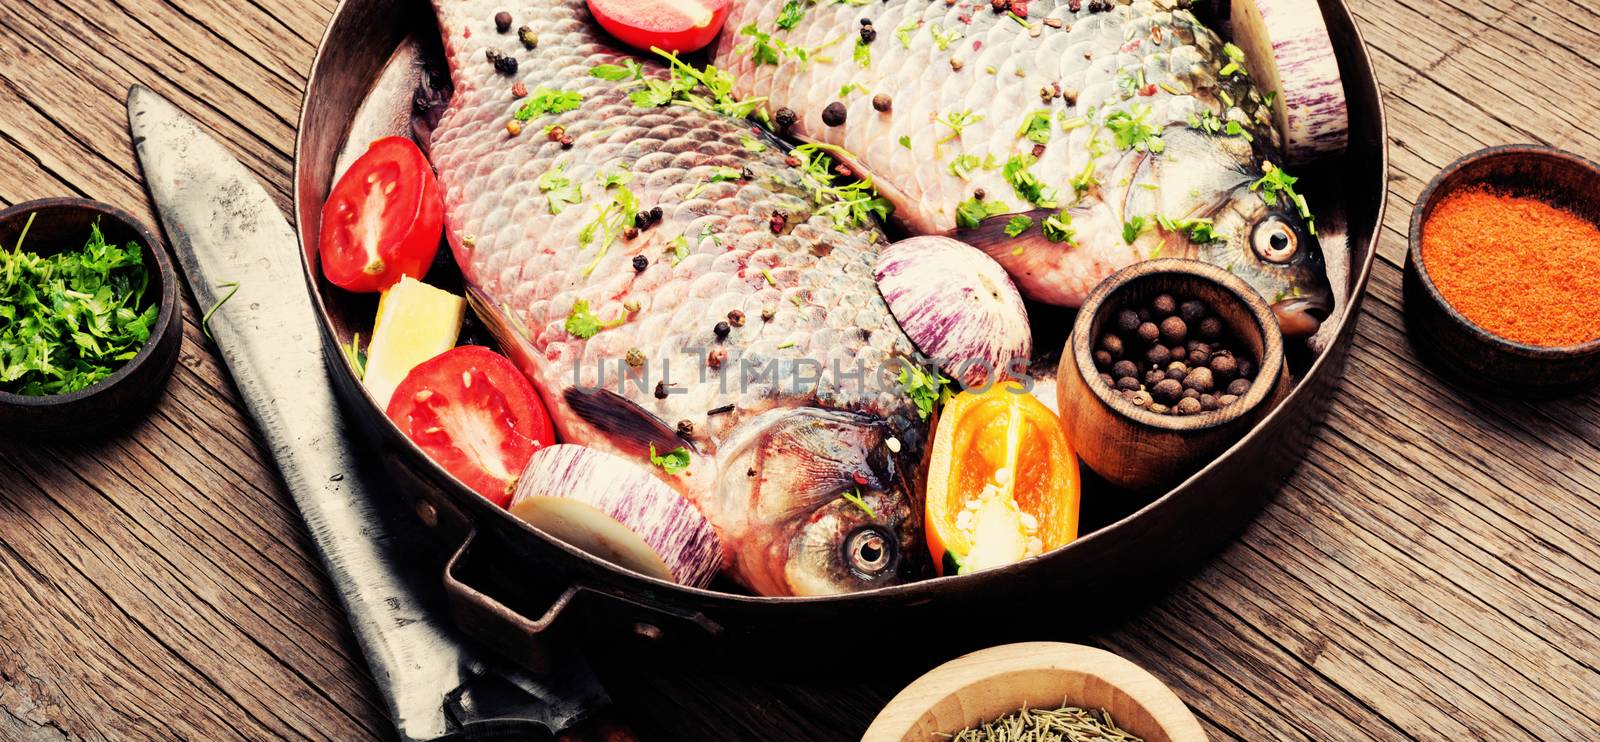 Fish with herbs, spices and vegetables - healthy food.Dietary food